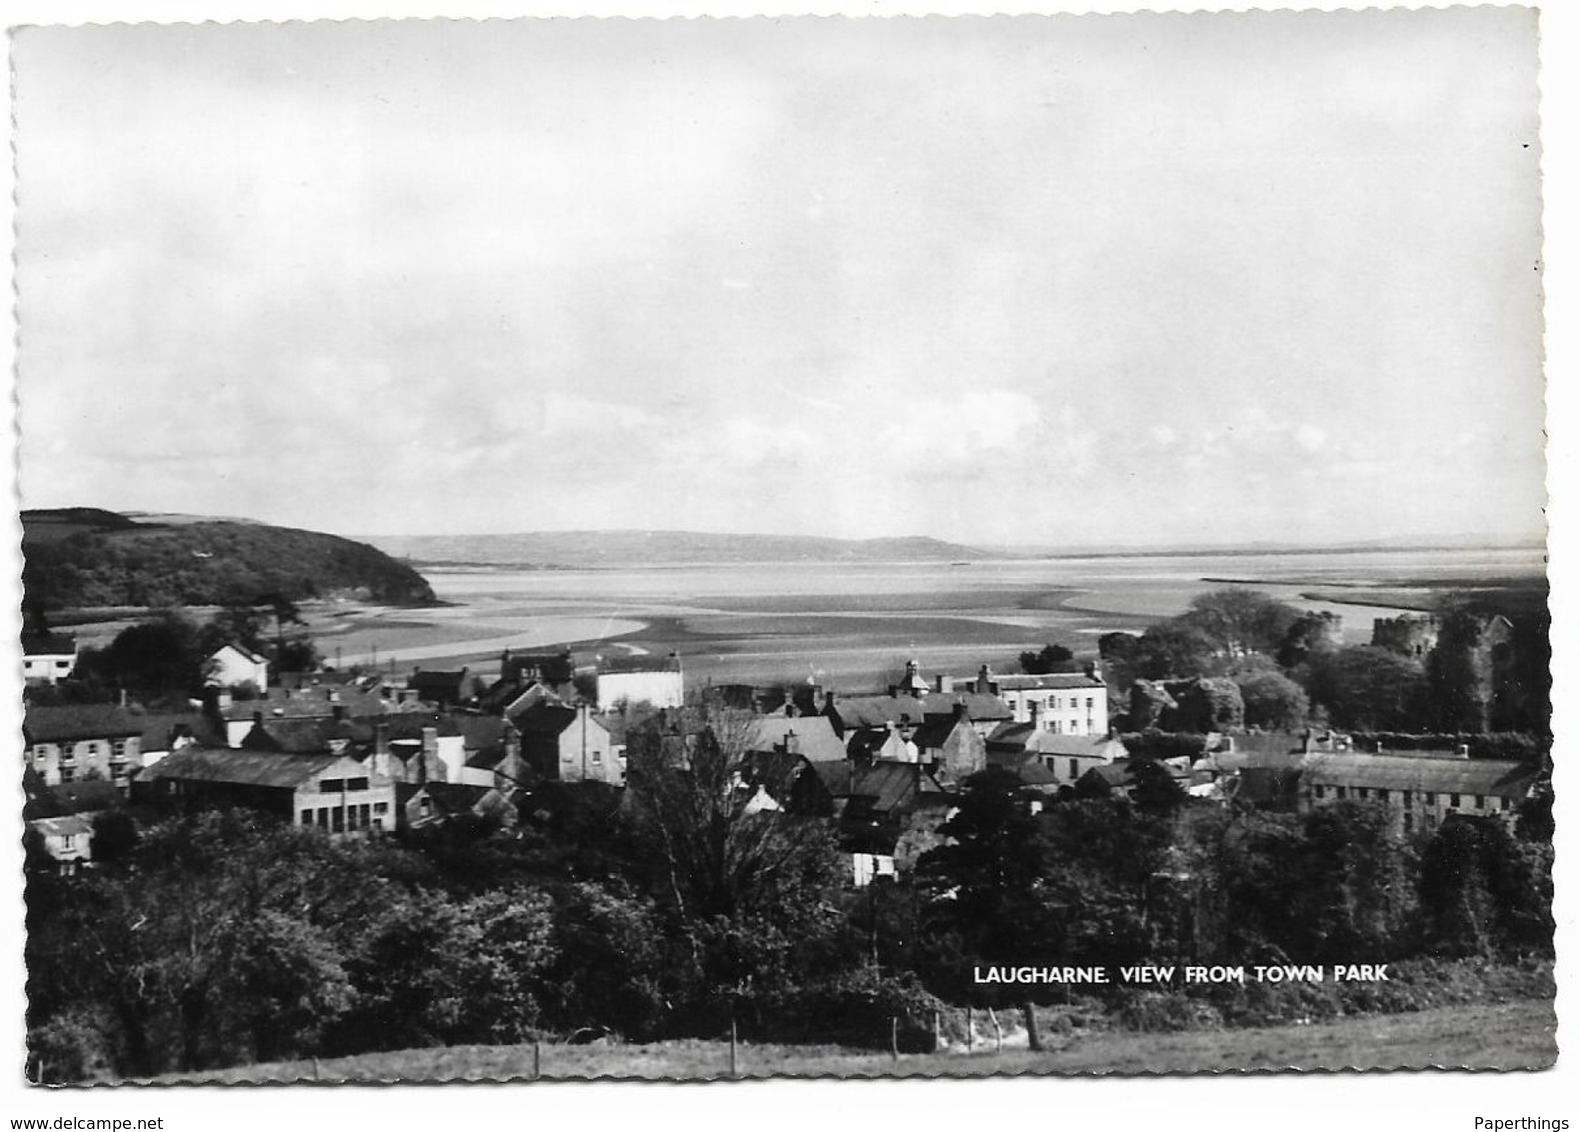 Real Photo Postcard, Laugharne, View From Town Park. Sea View, Landscape, Houses. - Carmarthenshire